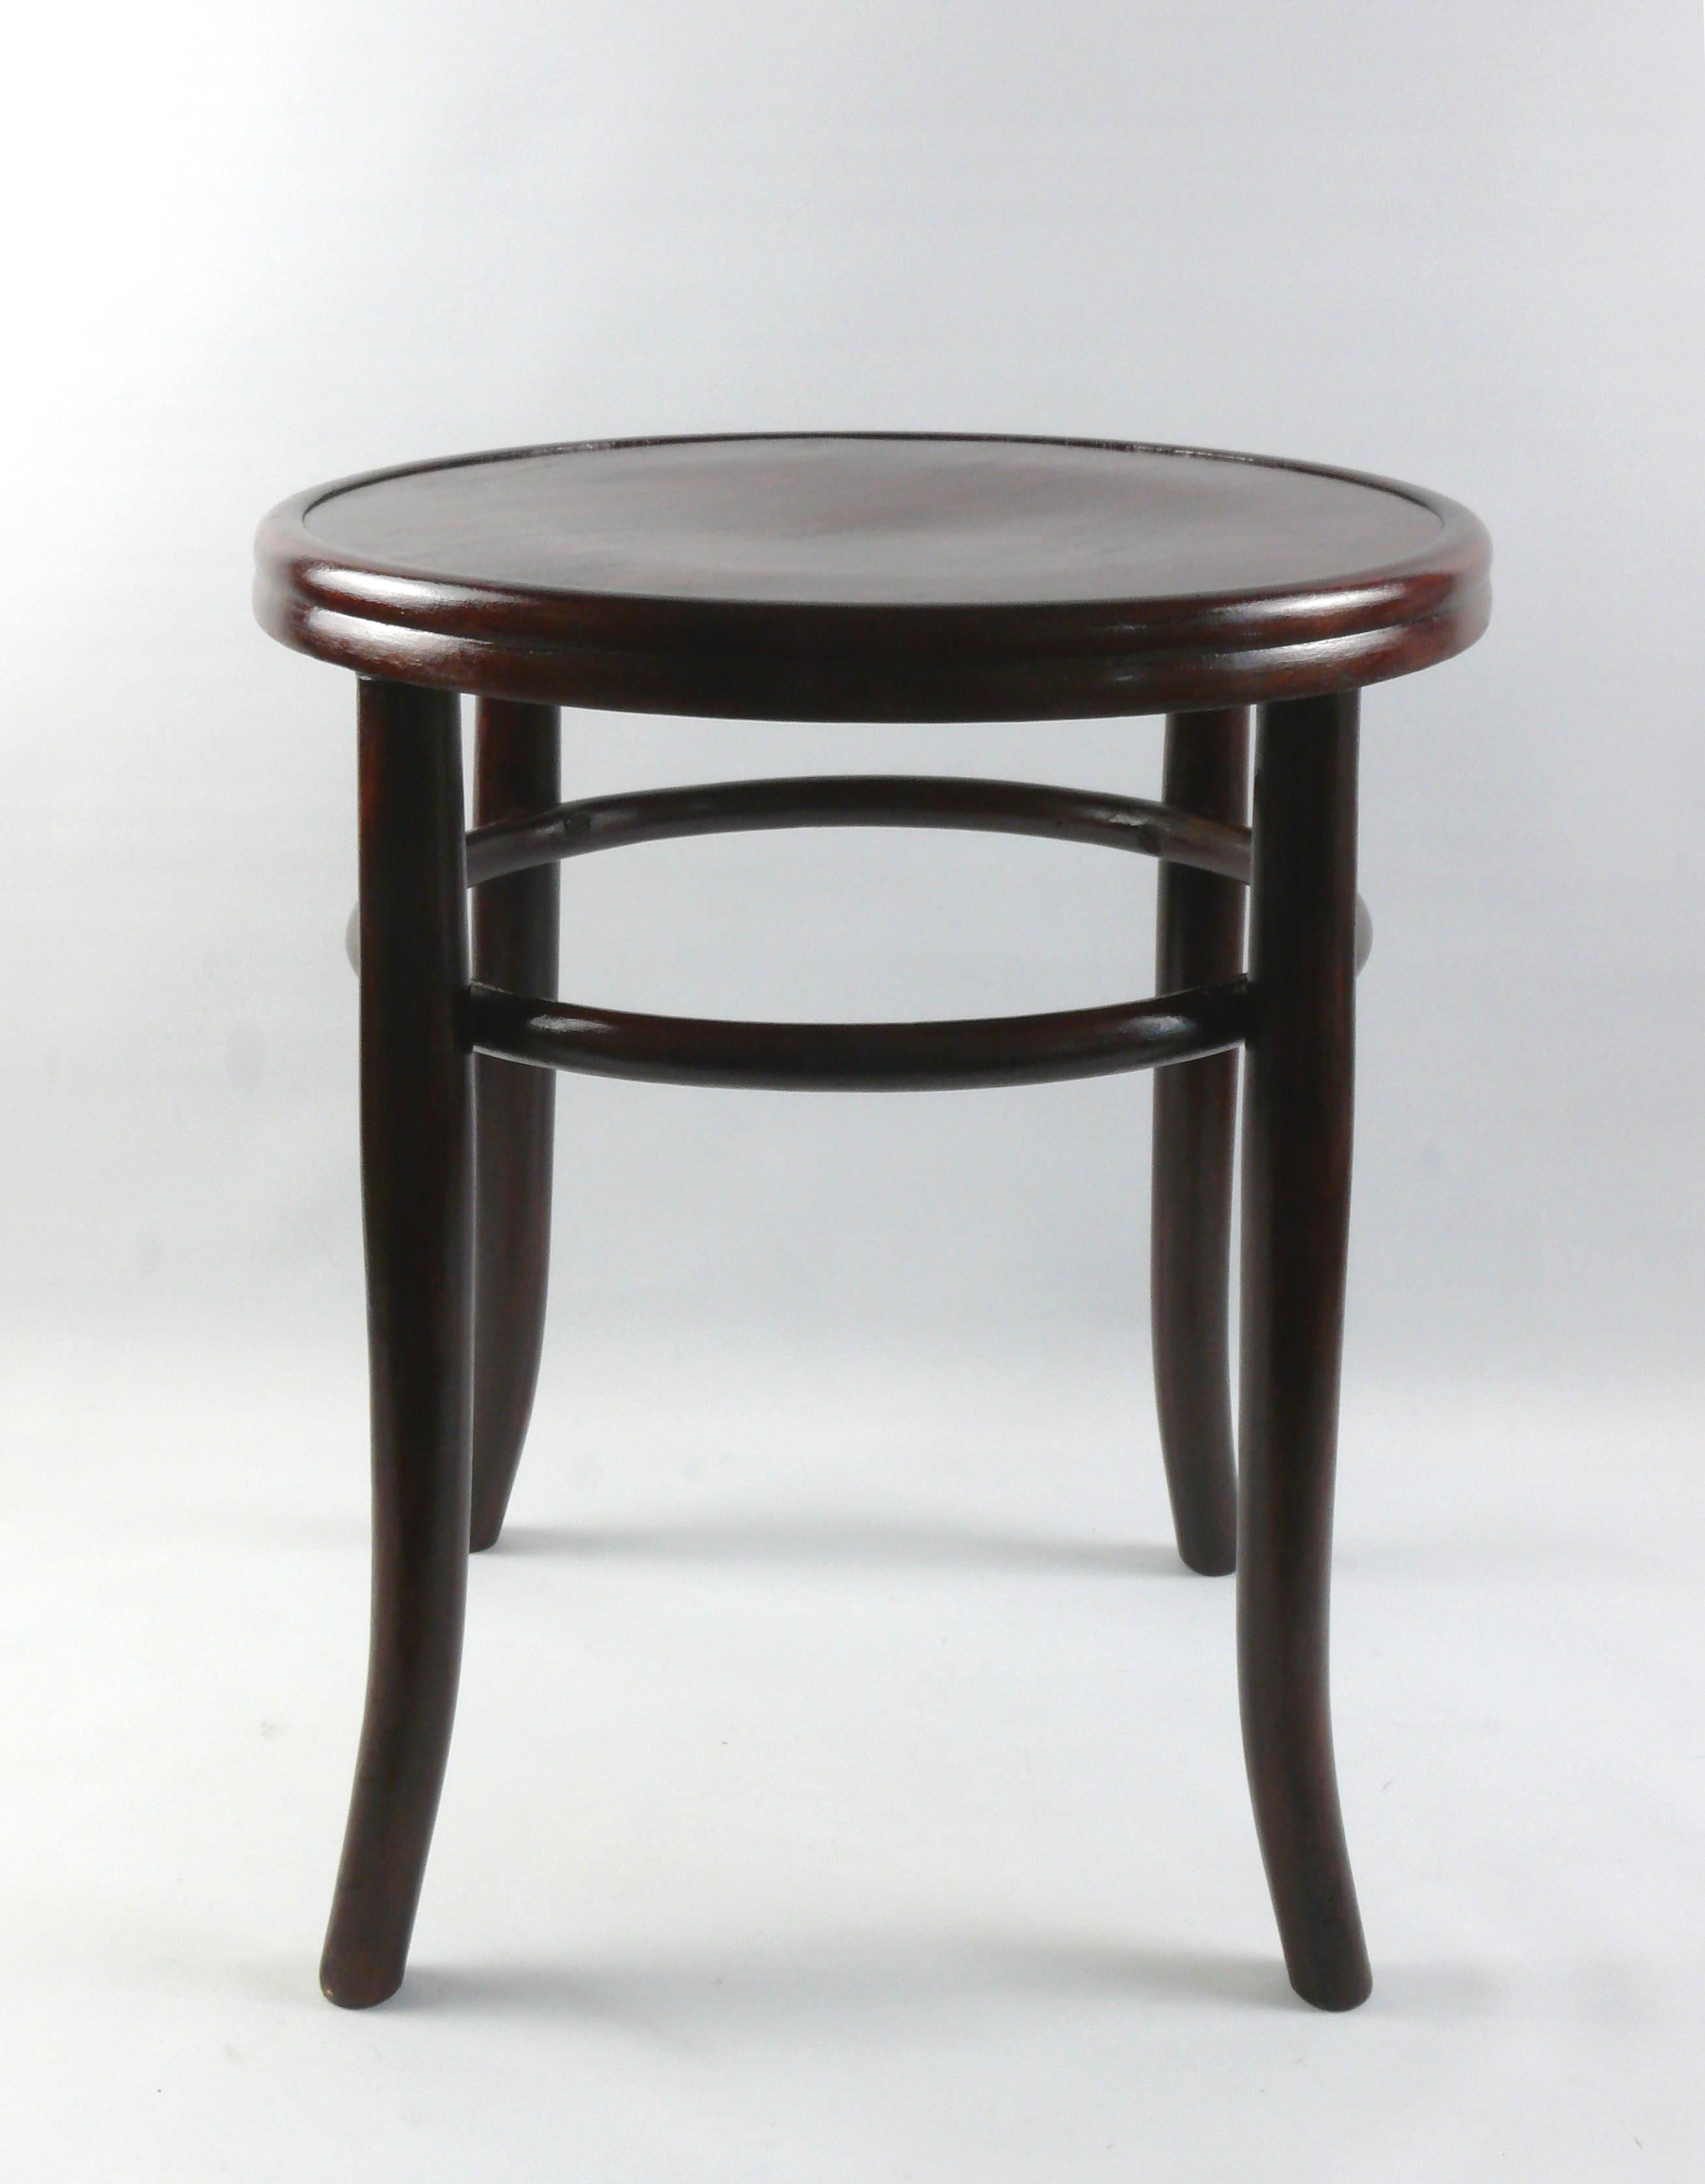 Restored bentwood stool - beech, around 1900. The stool is made of bent beech wood and has a bentwood ring below the seat for stability. Michael Thonet developed this construction principle and applied it to many of his chairs and stools. The seat